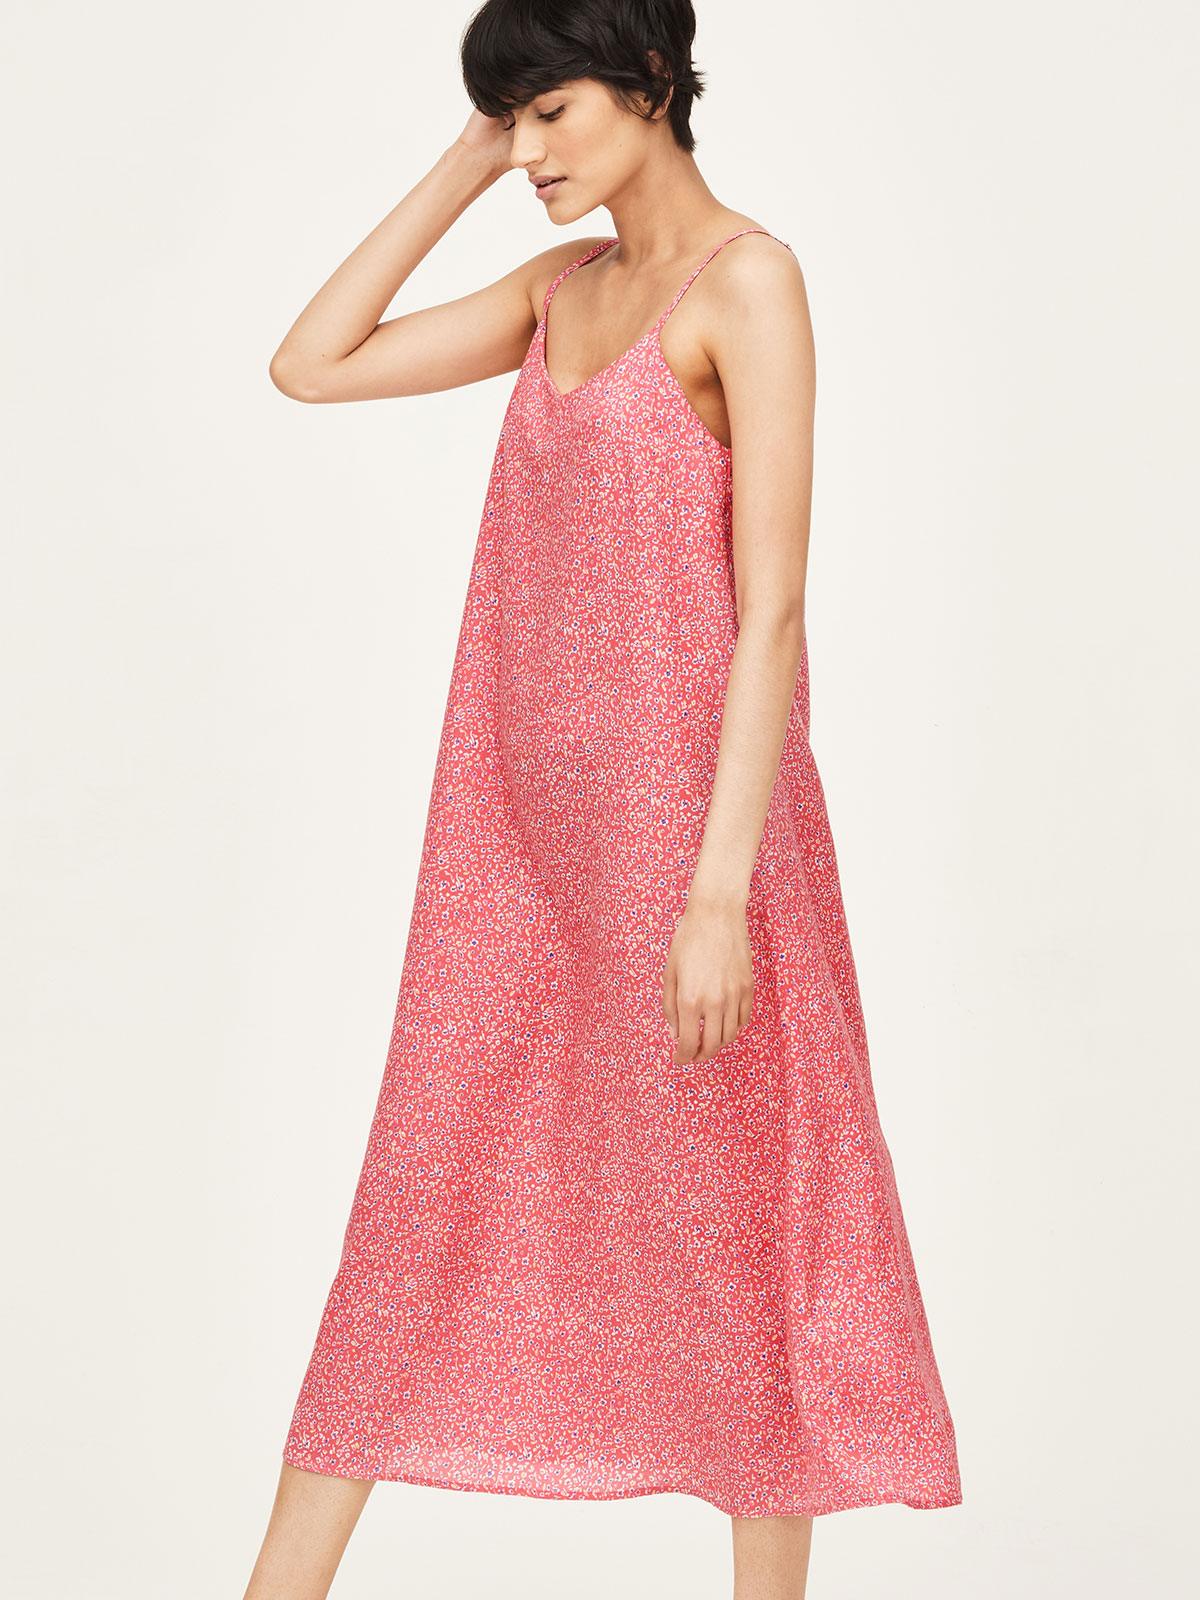 Miriam Cami Dress - Berry Pink - Thought Clothing UK